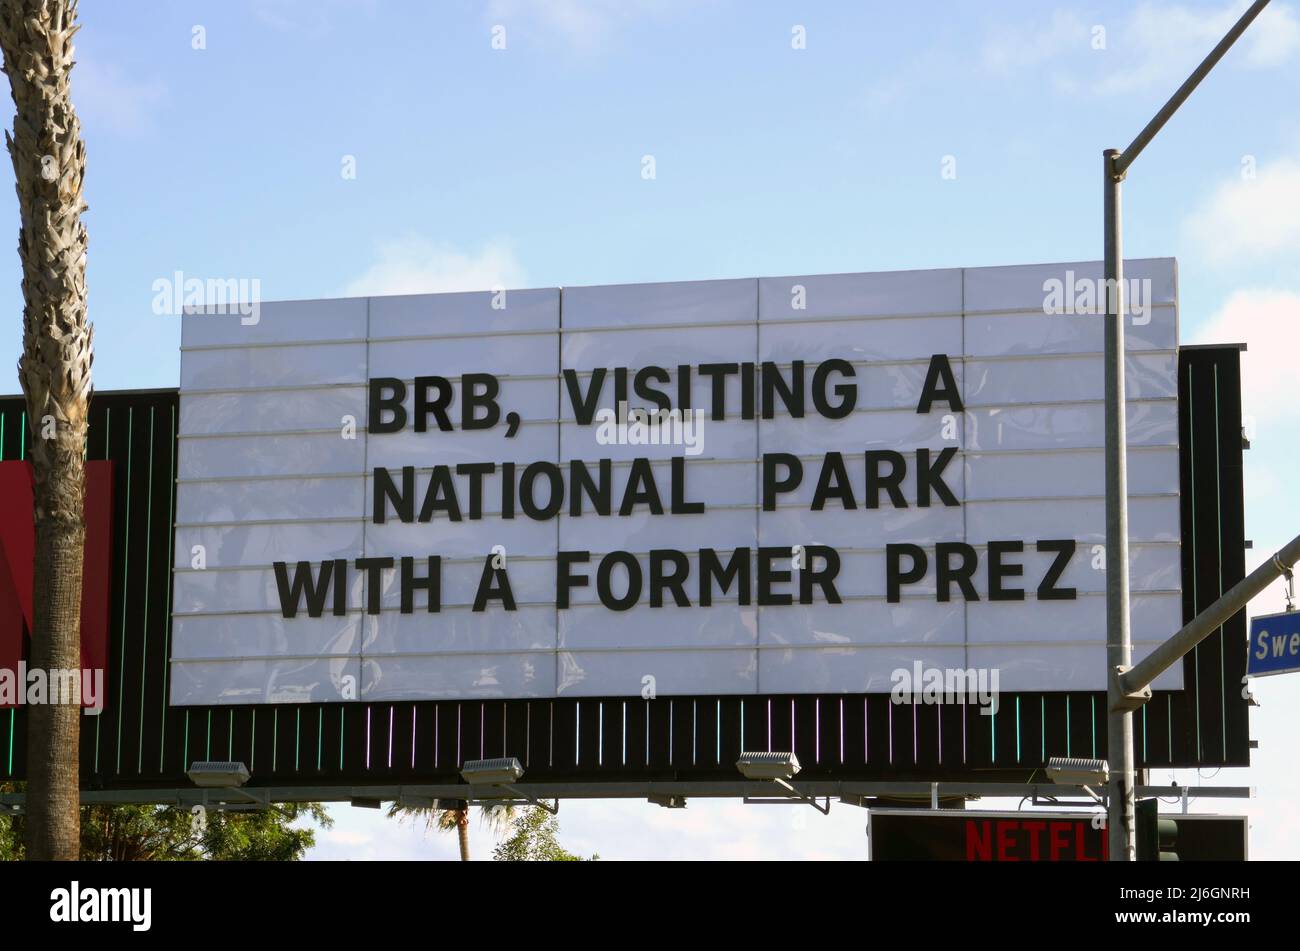 Los Angeles, California, USA 21st April 2022 A general view of atmosphere of BRB, Visiting A National Park with a Former Prez Netflix Billboard on April 21, 2022 in Los Angeles, California, USA. Photo by Barry King/Alamy Stock Photo Stock Photo